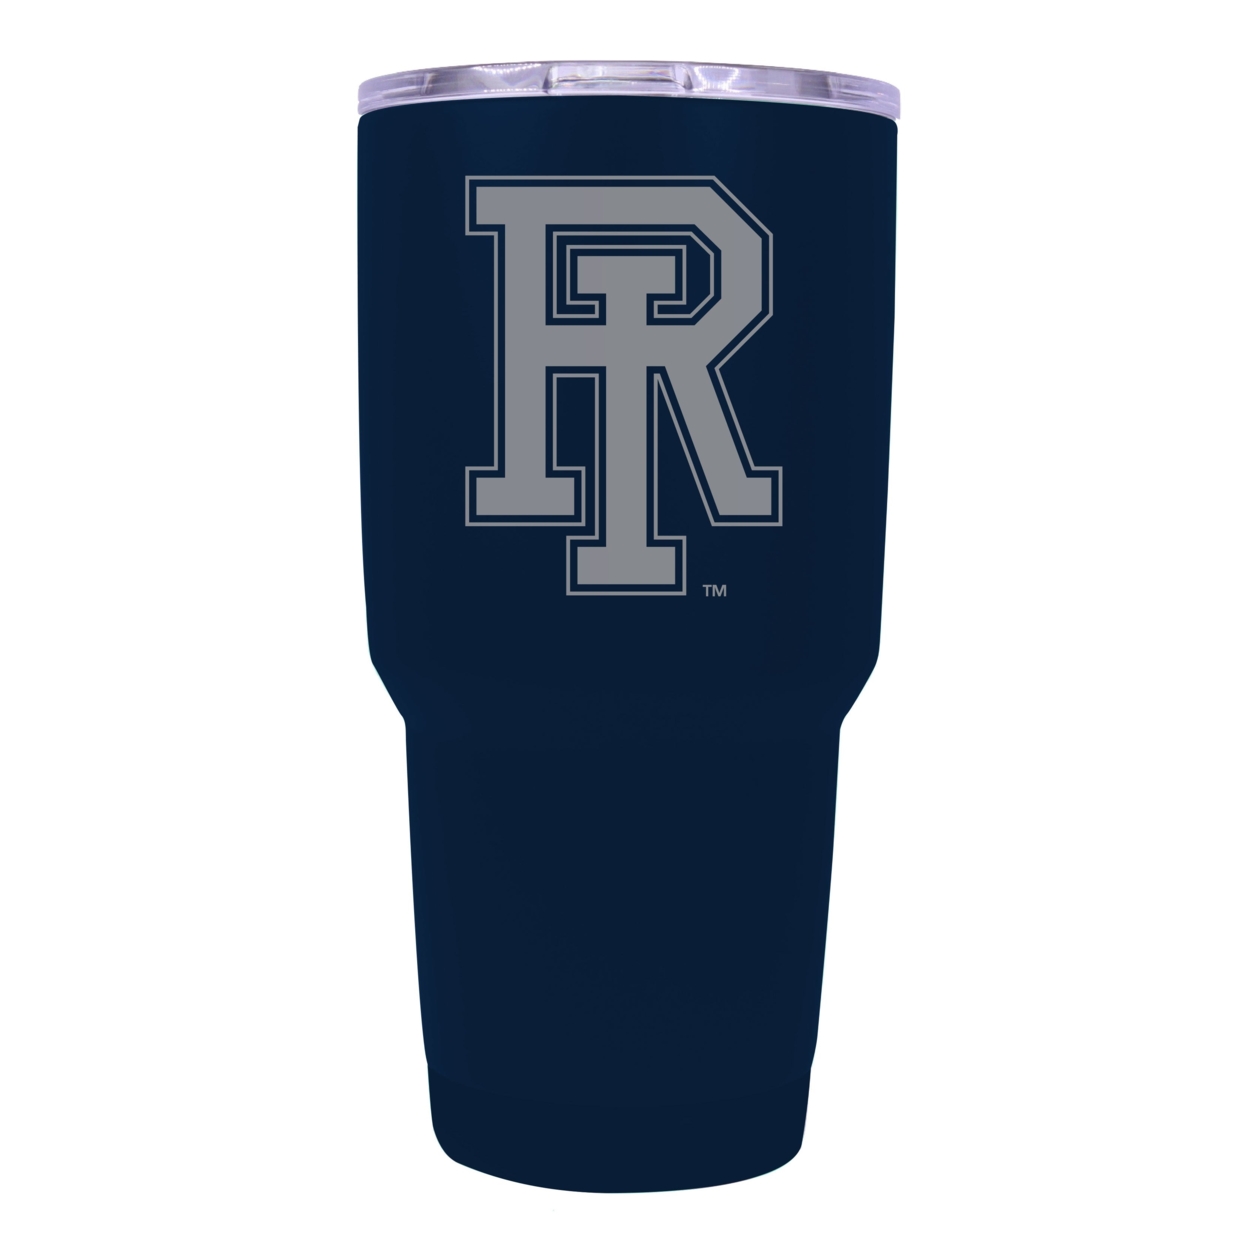 Rhode Island University 24 Oz Laser Engraved Stainless Steel Insulated Tumbler - Choose Your Color. - Navy